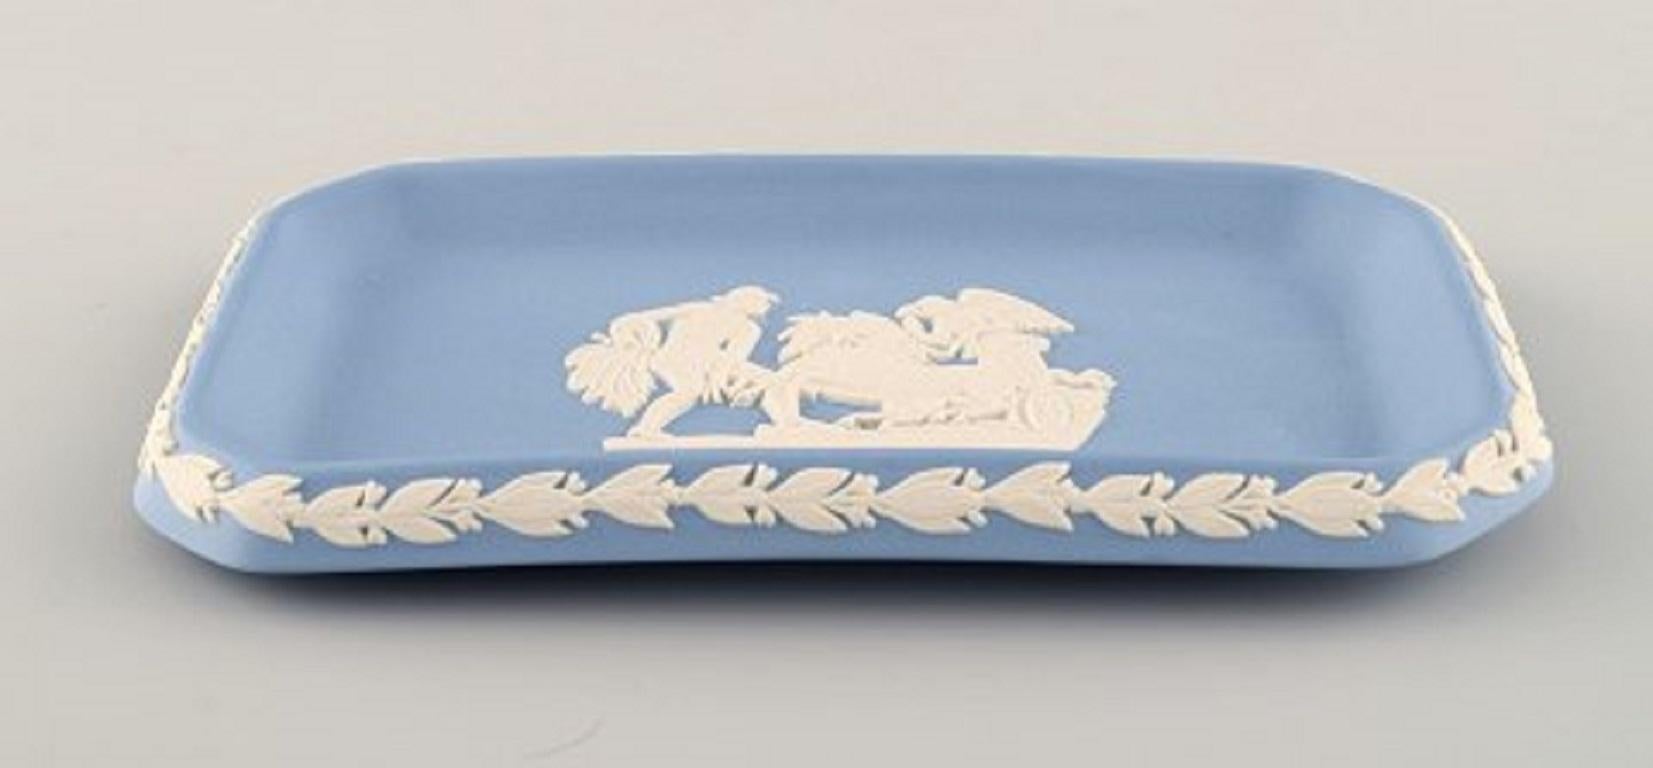 Wedgwood, England. Small square dish in light blue stoneware with classicist scenes in white, circa 1930.
Measures: 16 x 8.5 cm.
Stamped.
In very good condition.